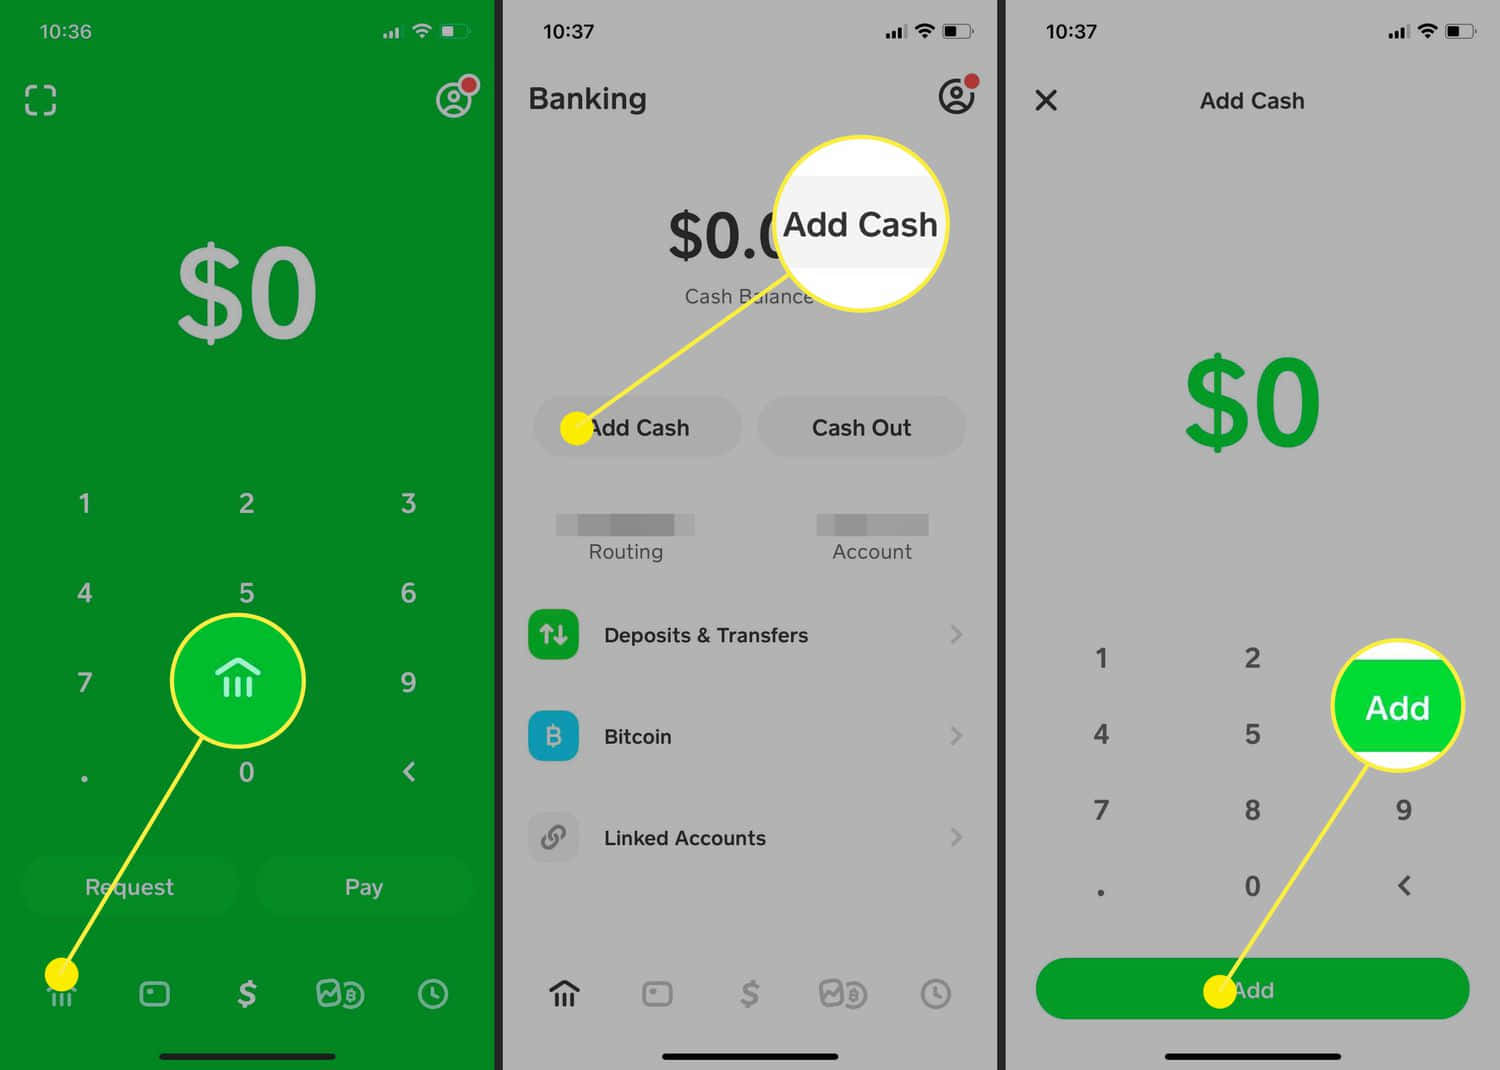 "Send, receive and manage your money with Cash App Balance"